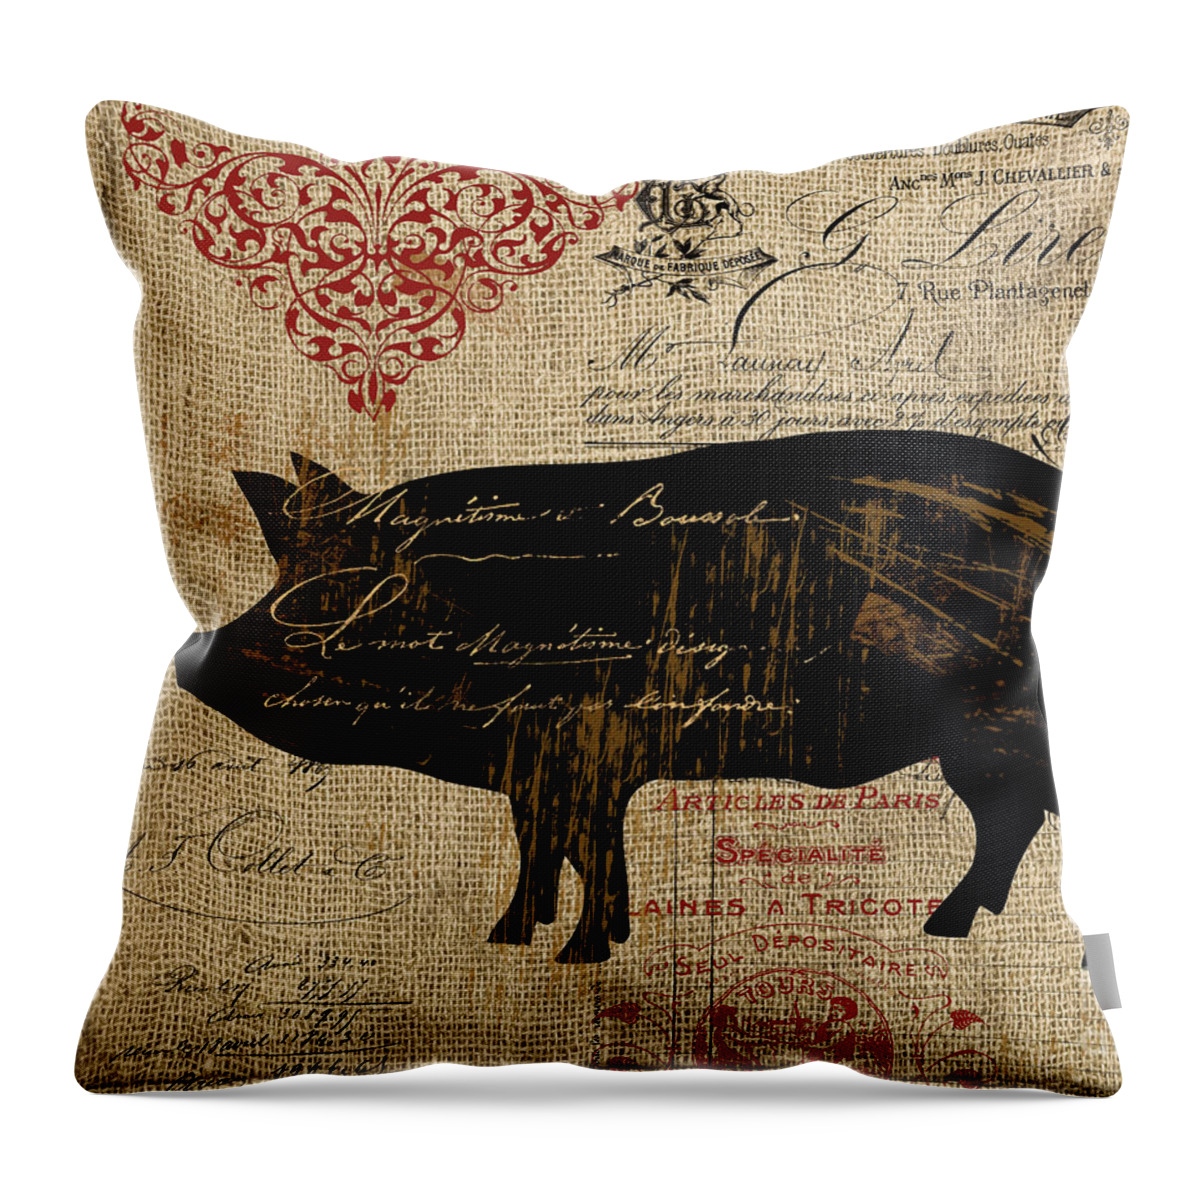 Cow Throw Pillow featuring the painting Ferme Farm Piglet by Mindy Sommers